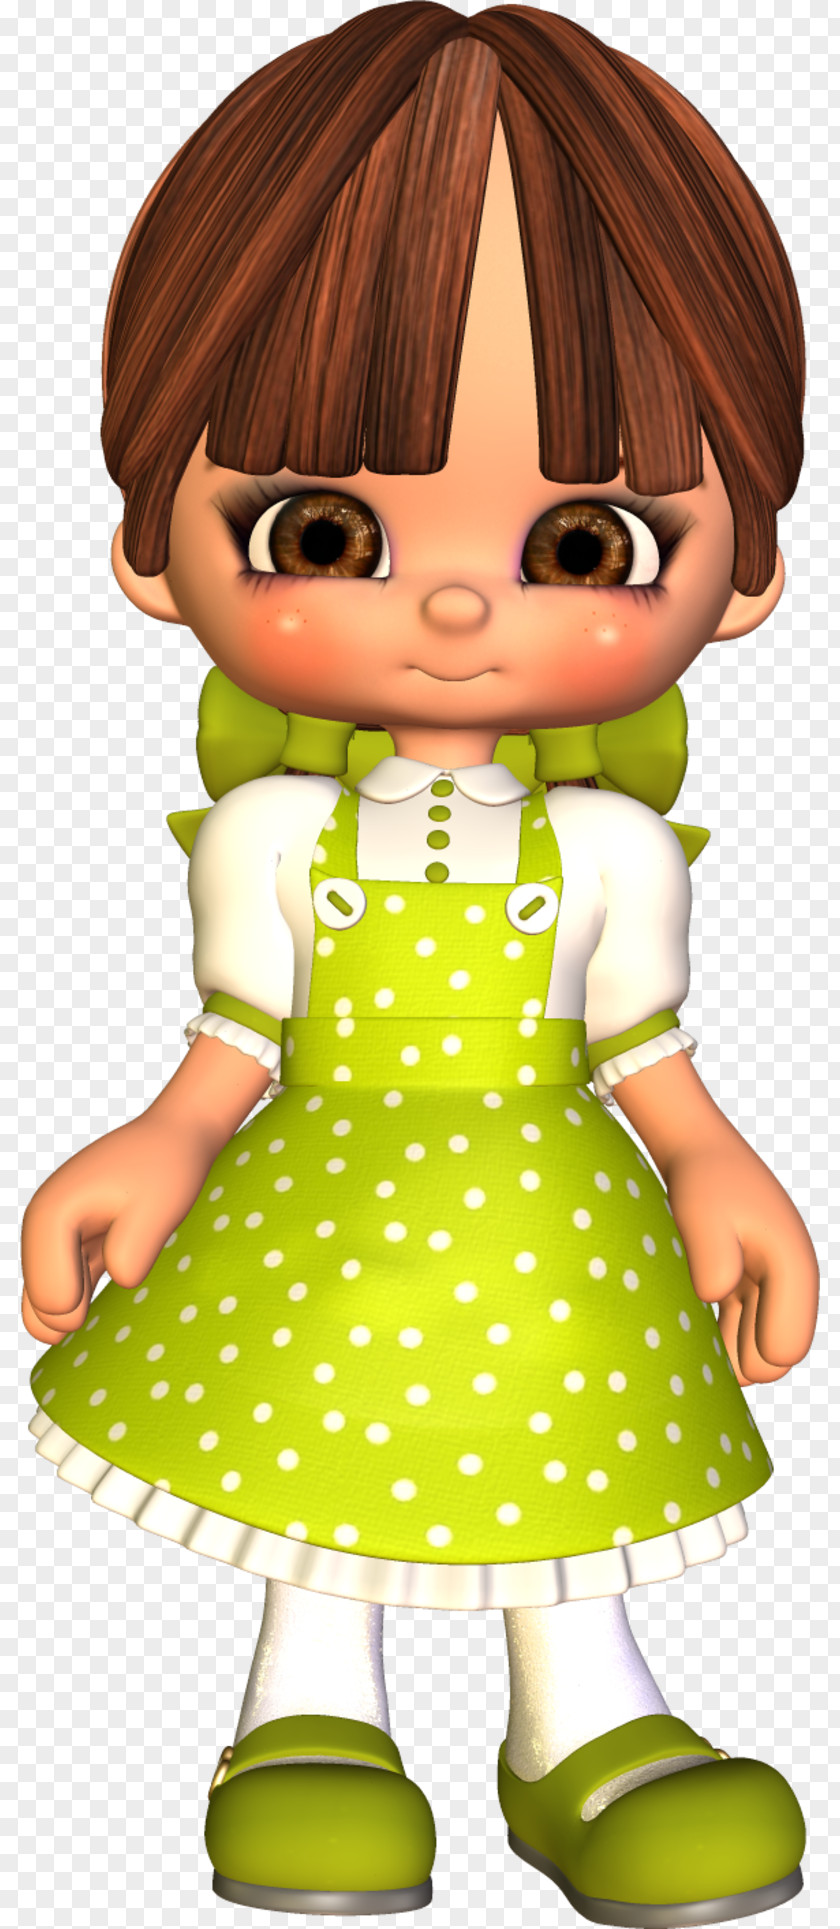 Doll Green Toddler Character Clip Art PNG